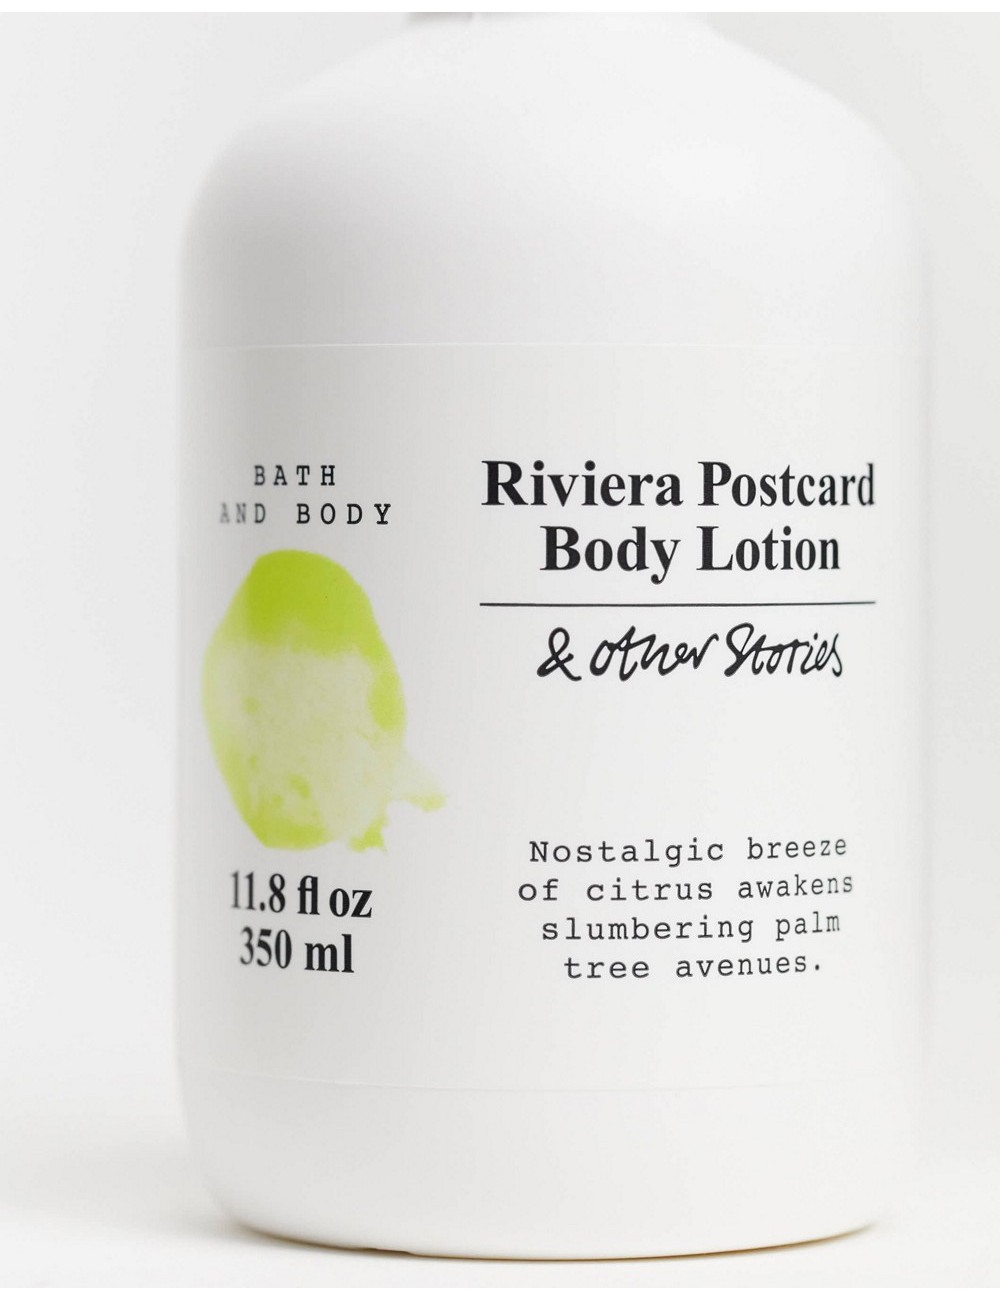 & Other Stories body lotion...